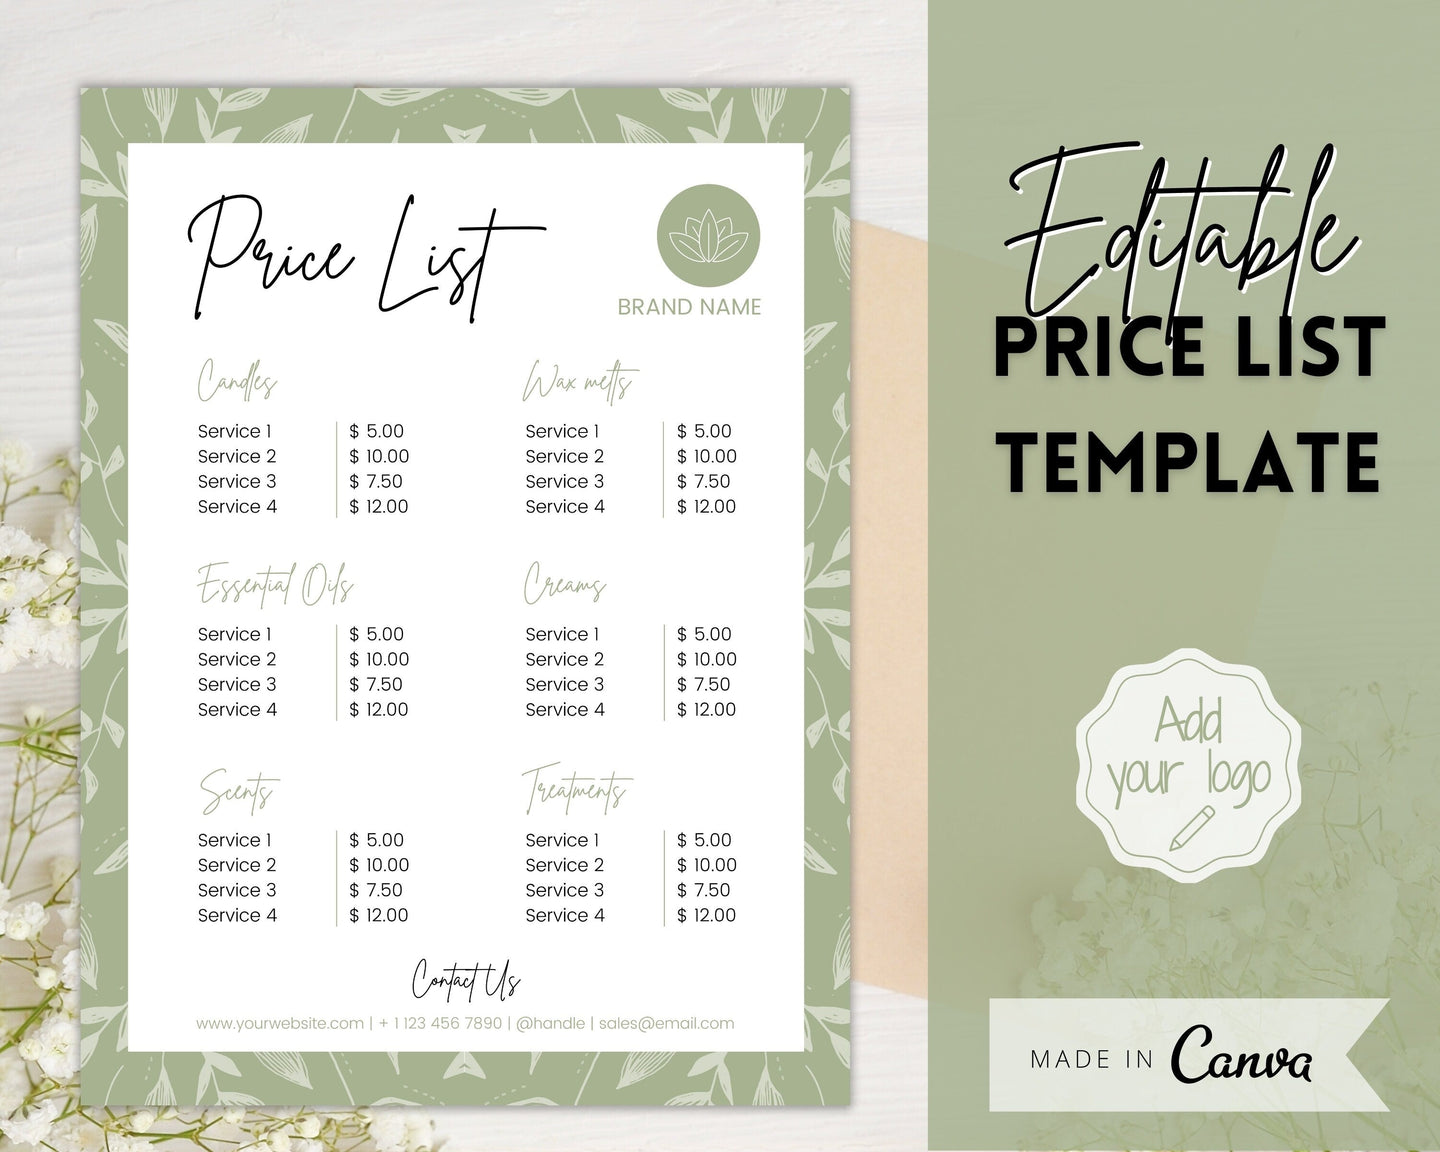 PRICE LIST Template Editable! Price Sheet, Pricing Guide, Hair Salon, Hairdresser, Photography, Beauty, Menu, Make up, Tags, Tumbler, Canva | Style 11